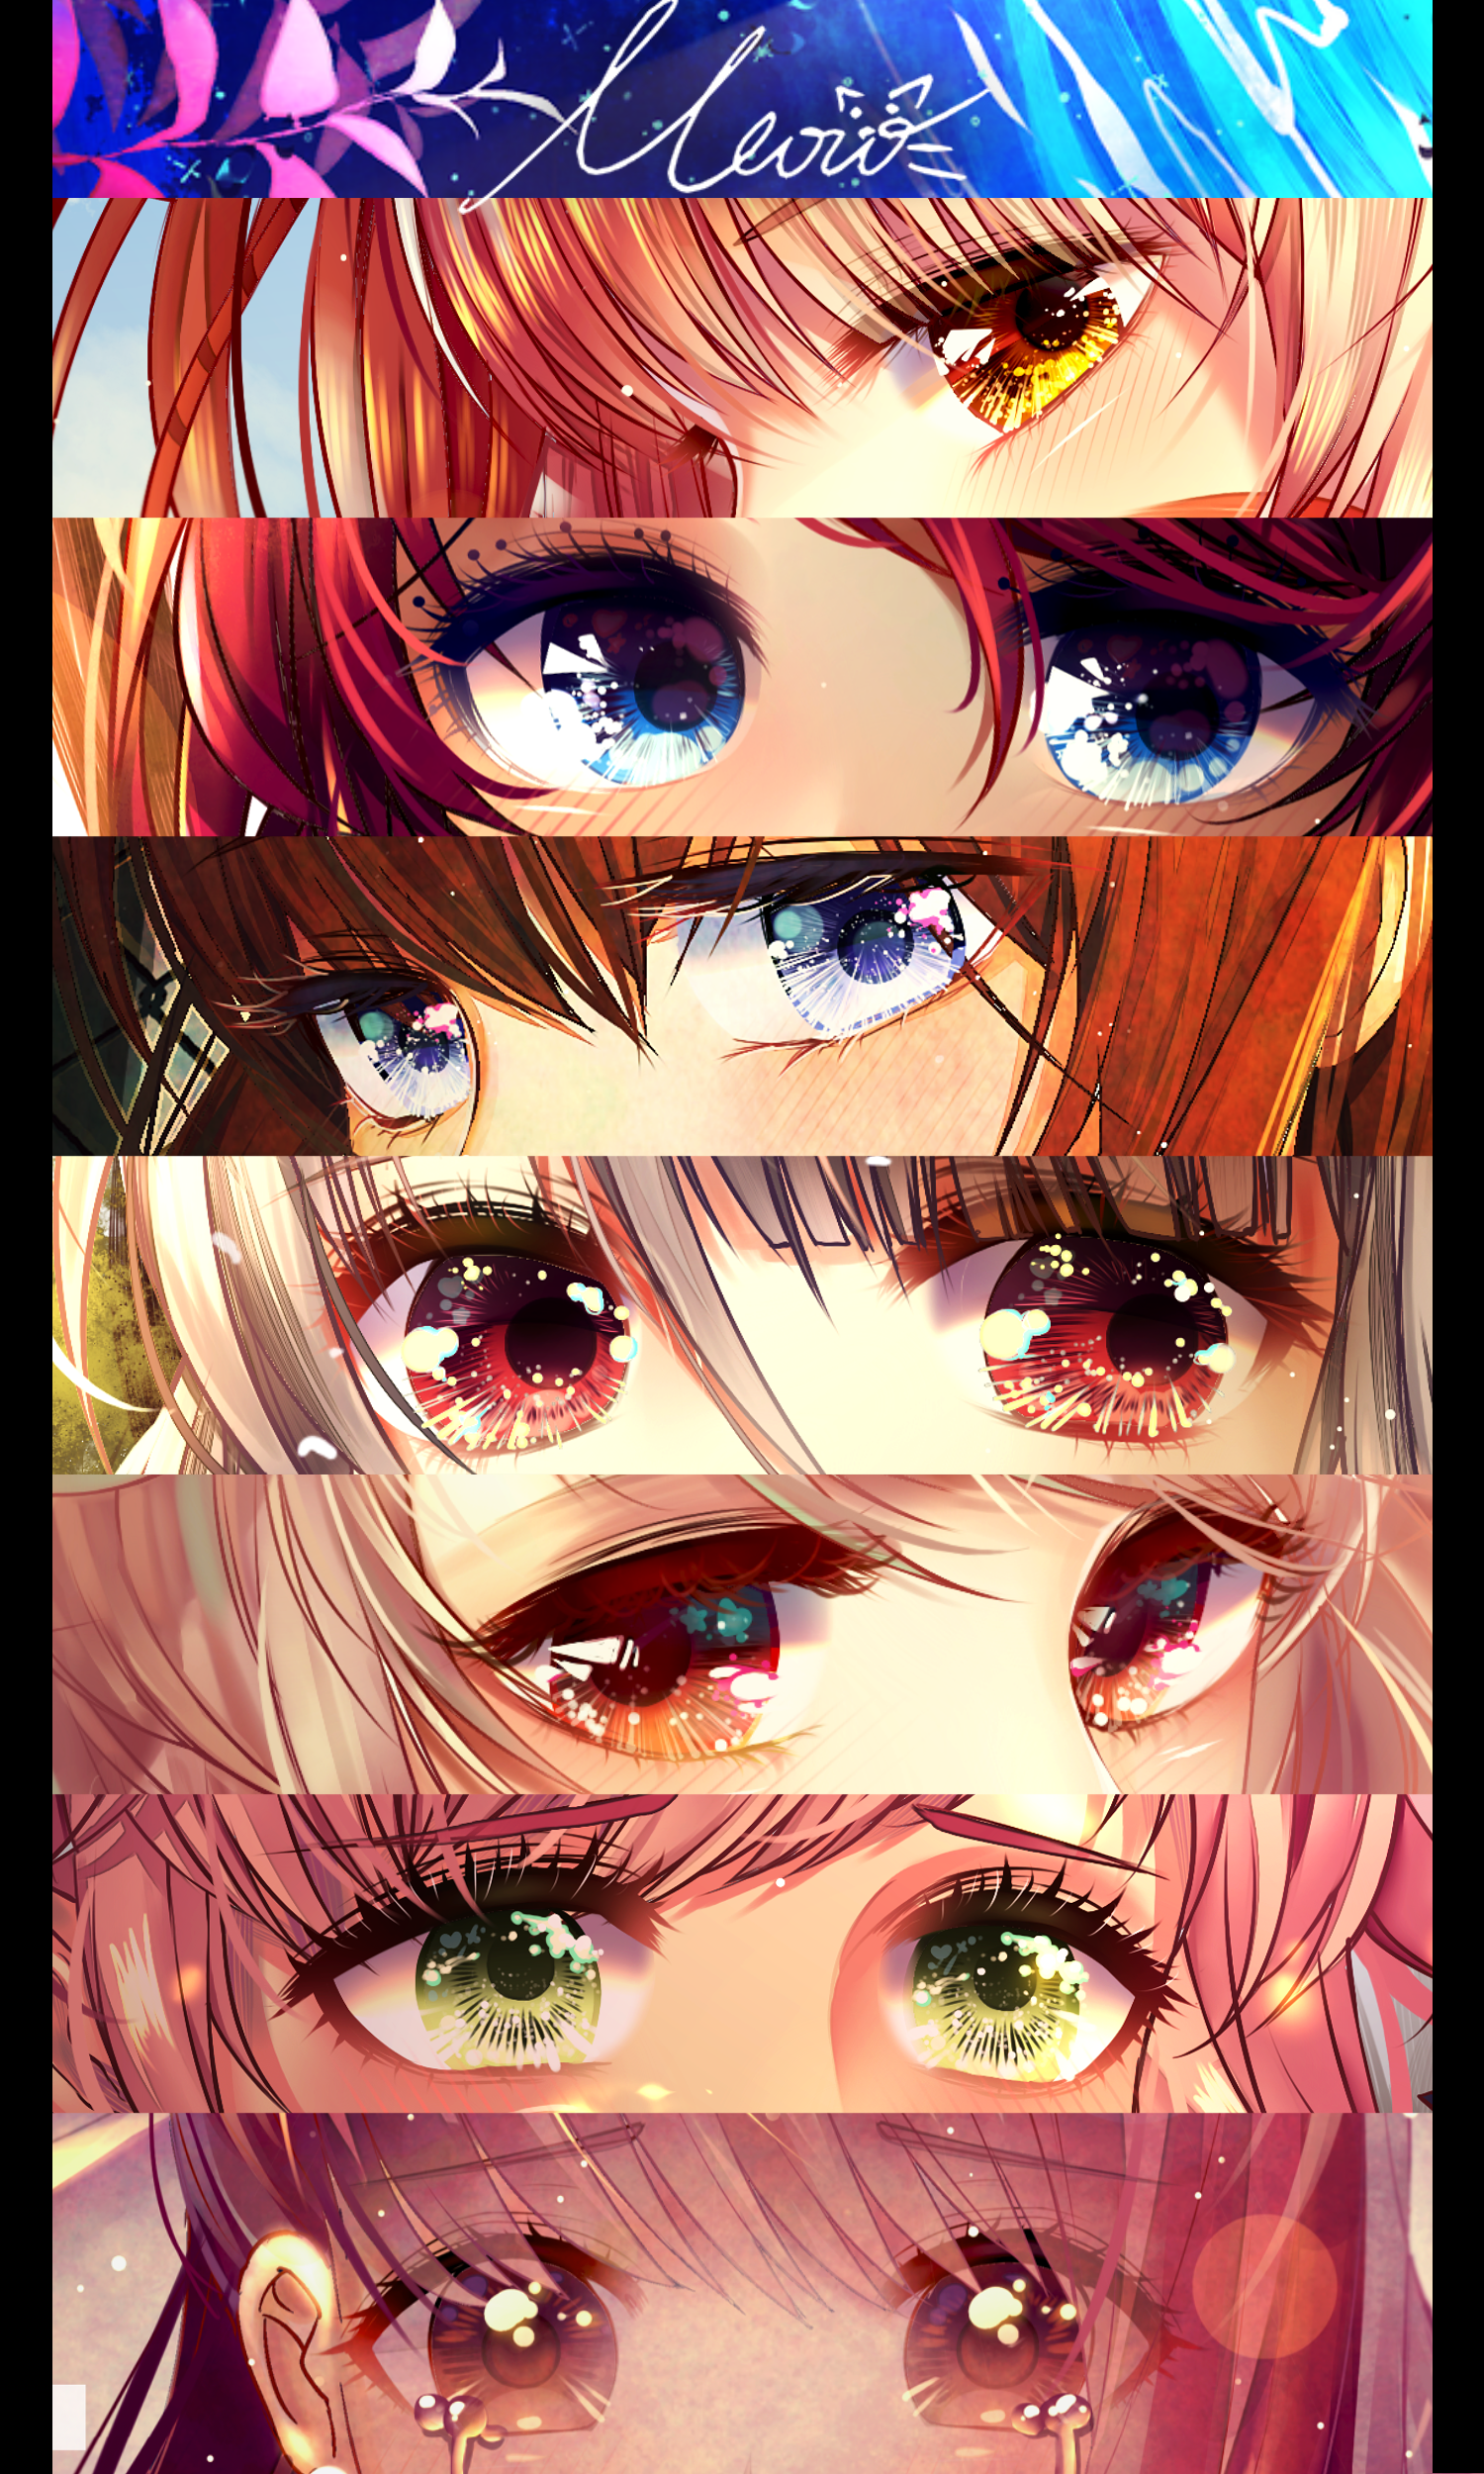 THE EYE MEME, AS FORETOLD IN THE PROPHECY by Meowmeowgirlx on DeviantArt